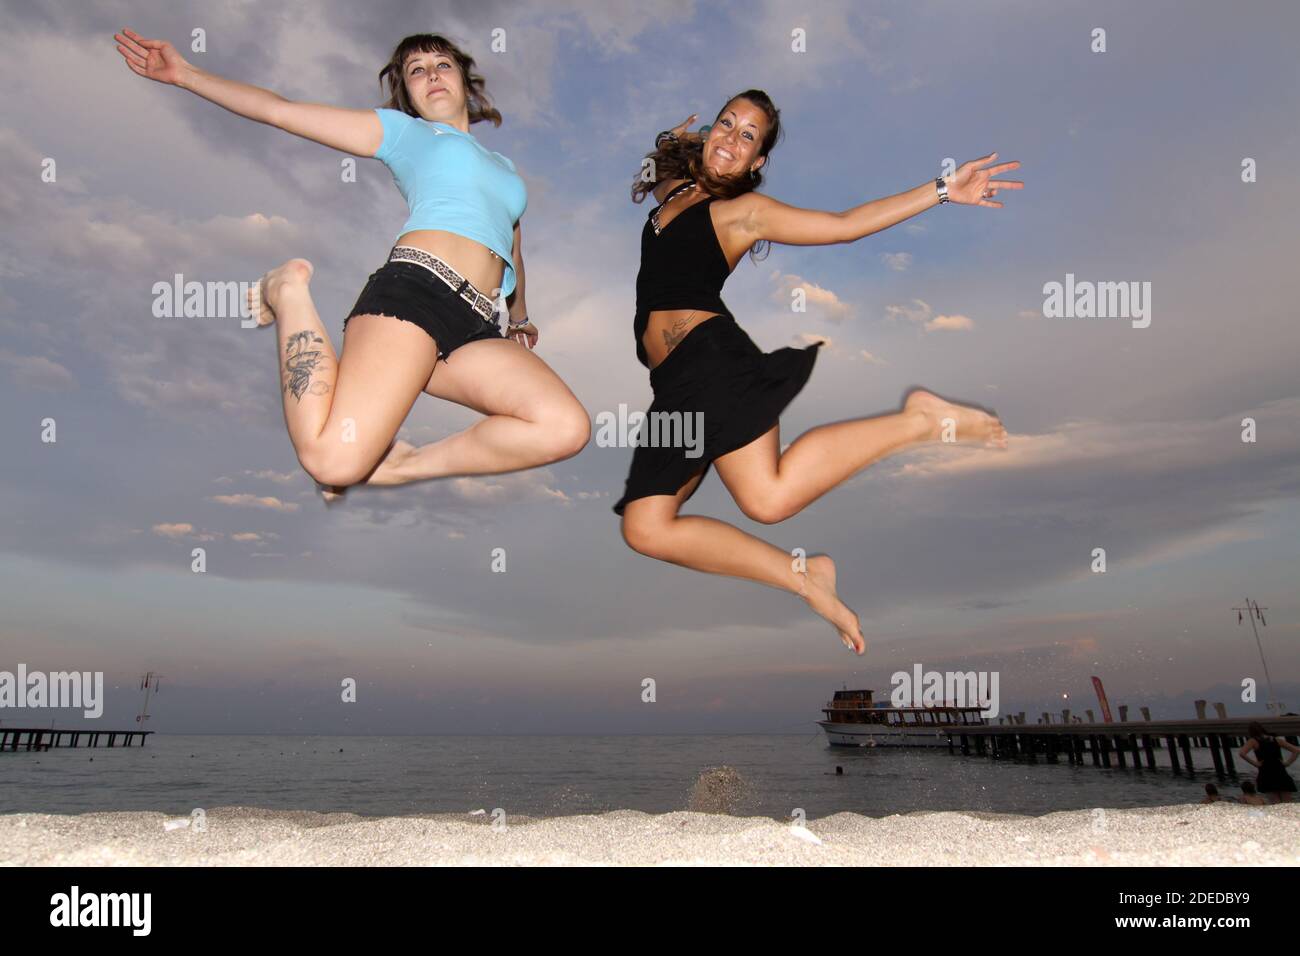 two young women jump into the air, the sky as background Stock Photo